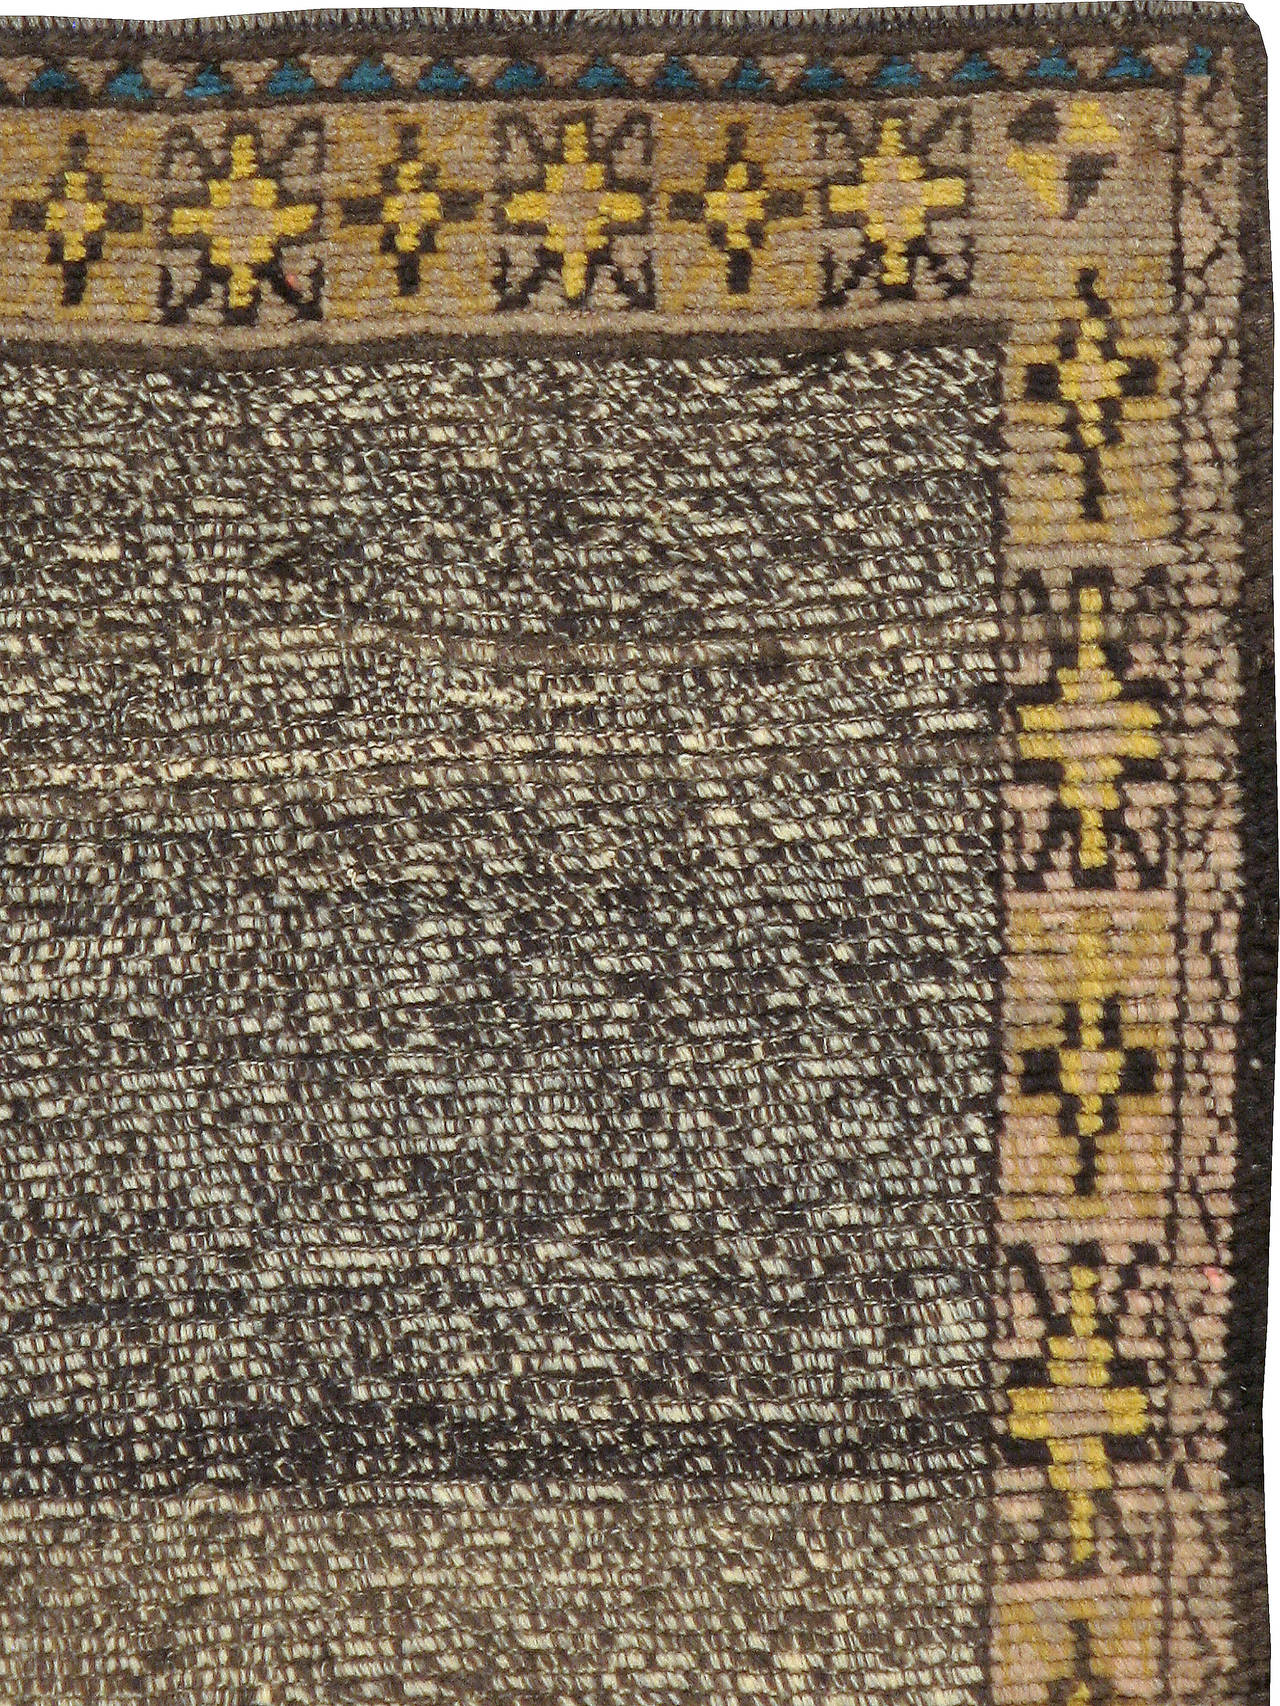 A vintage Turkish Konya carpet from the second quarter of the 20th century. The Greater Konya region of Turkey is known for producing some of the most luxurious wool in the world. Nomadic Konya rugs are often considered the Turkish equivalence of